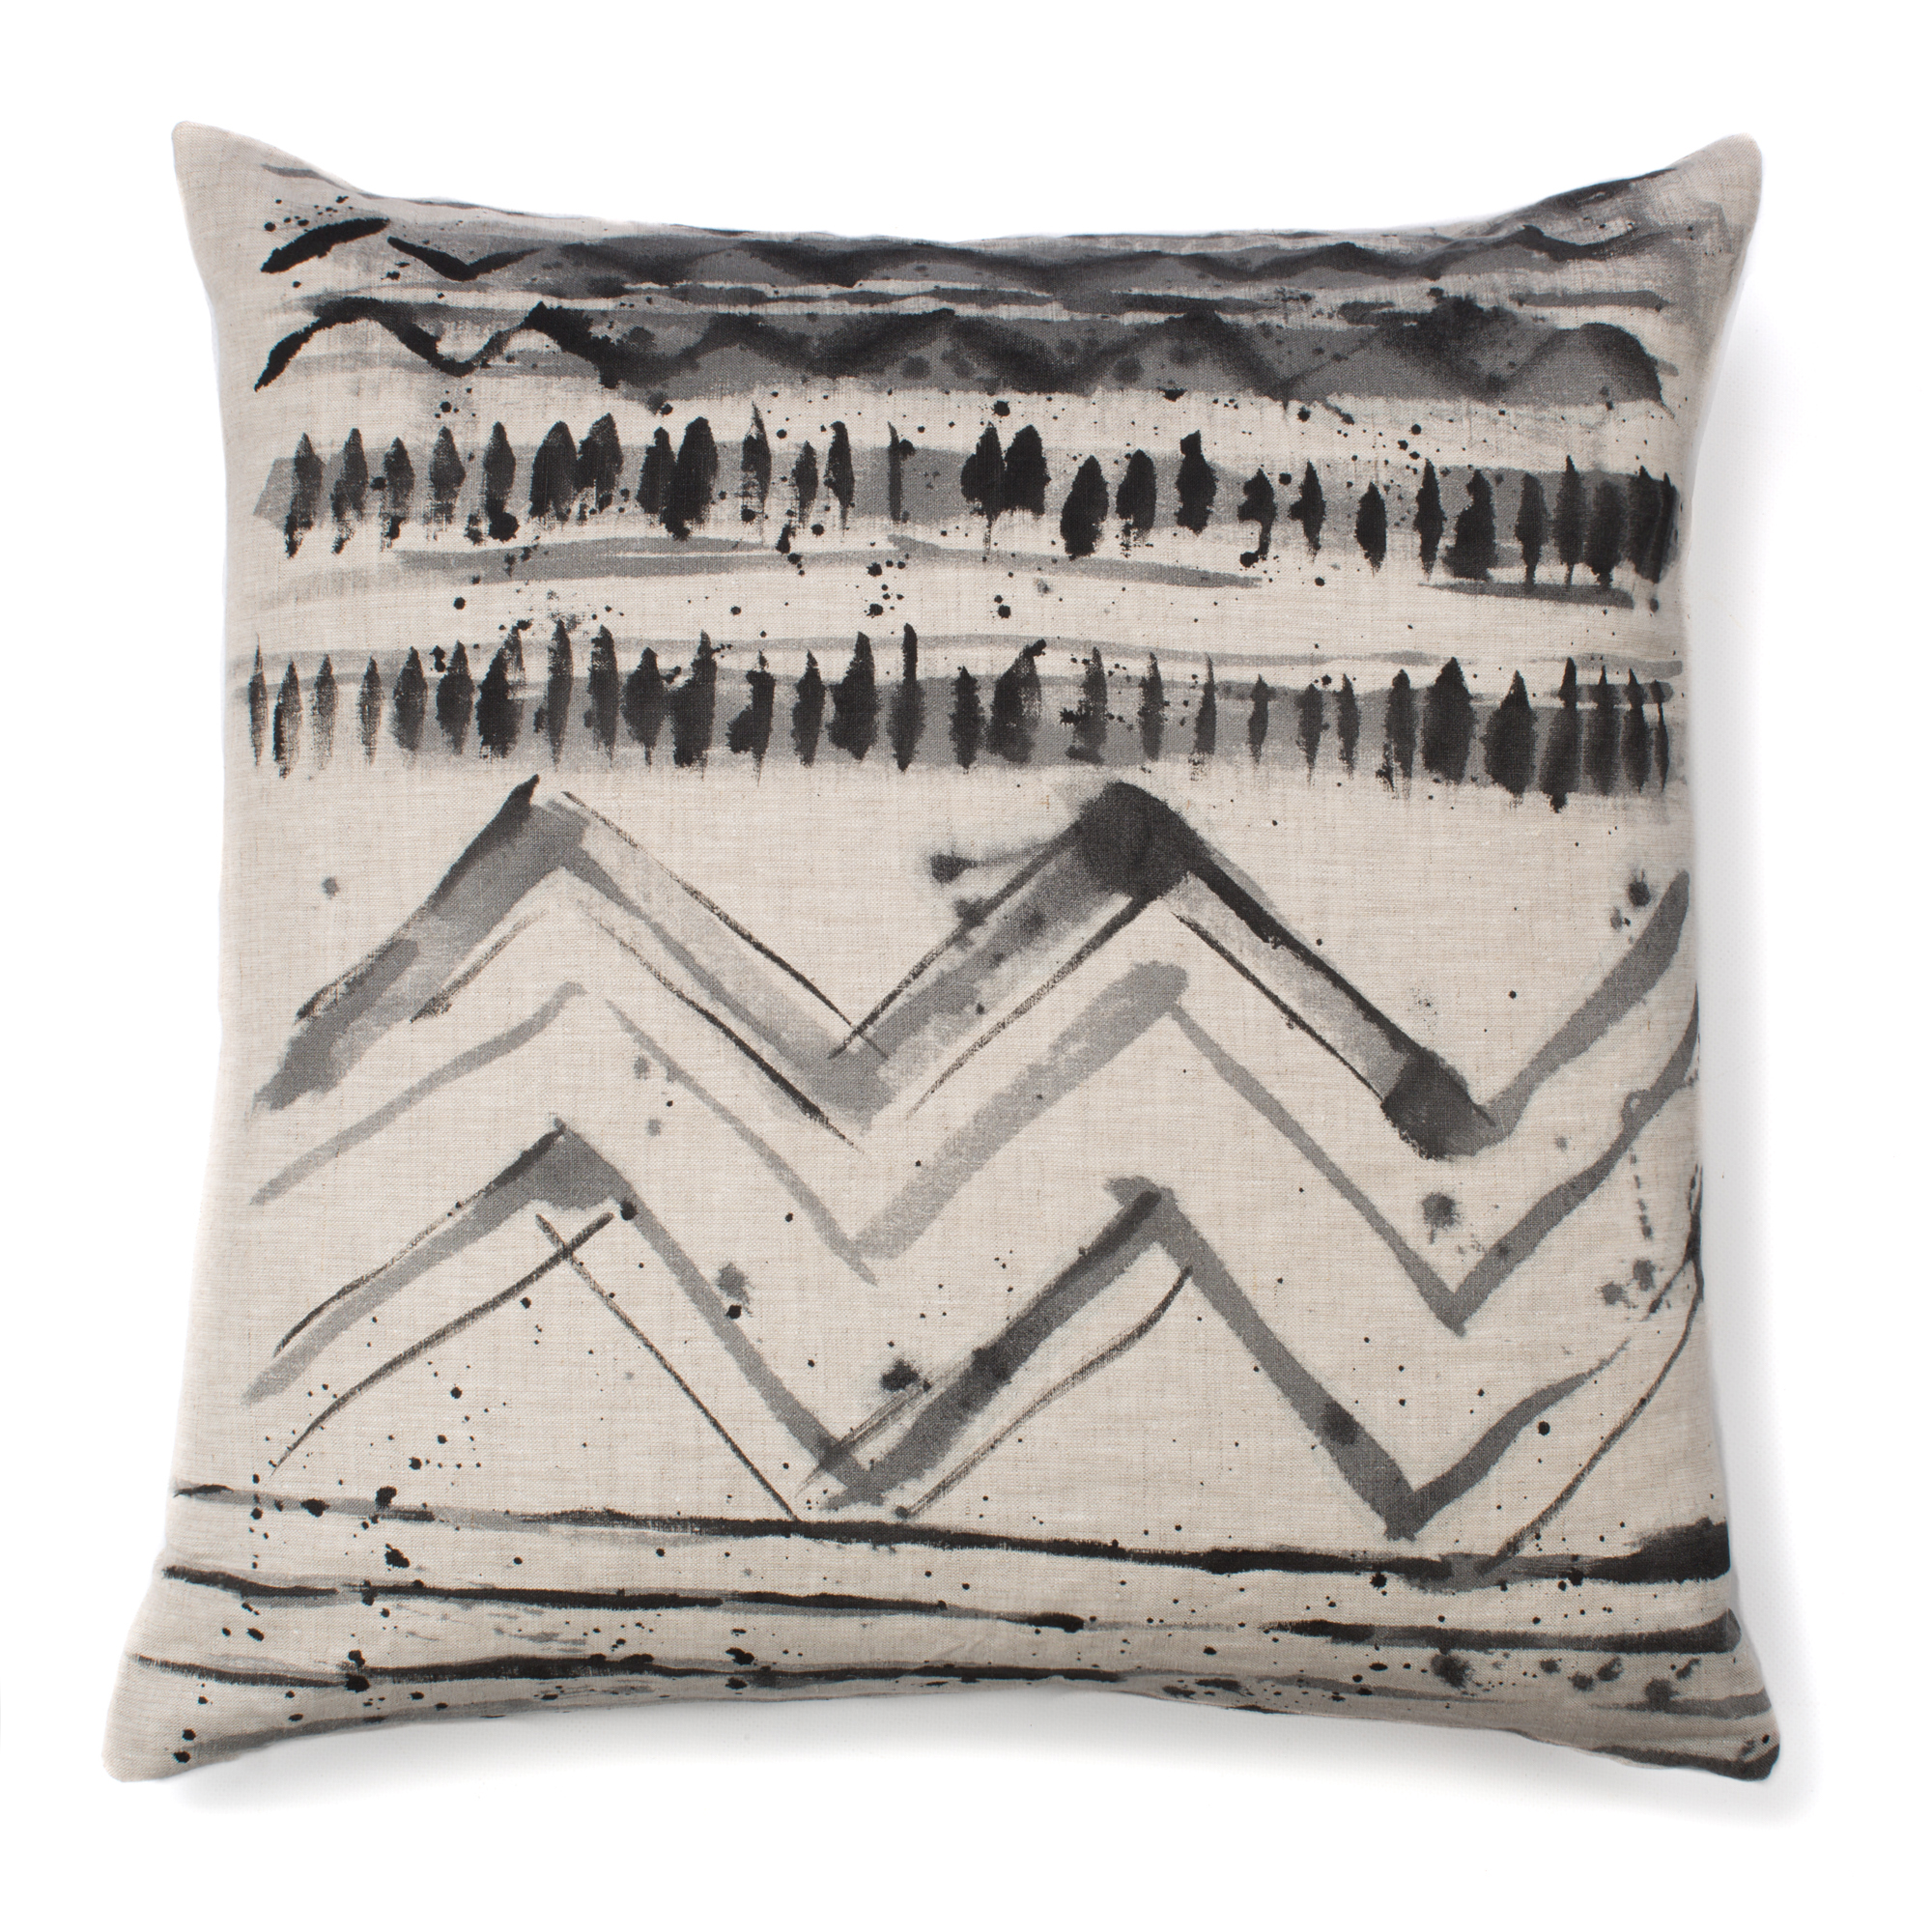 AbstractPillowFinished-1.jpg